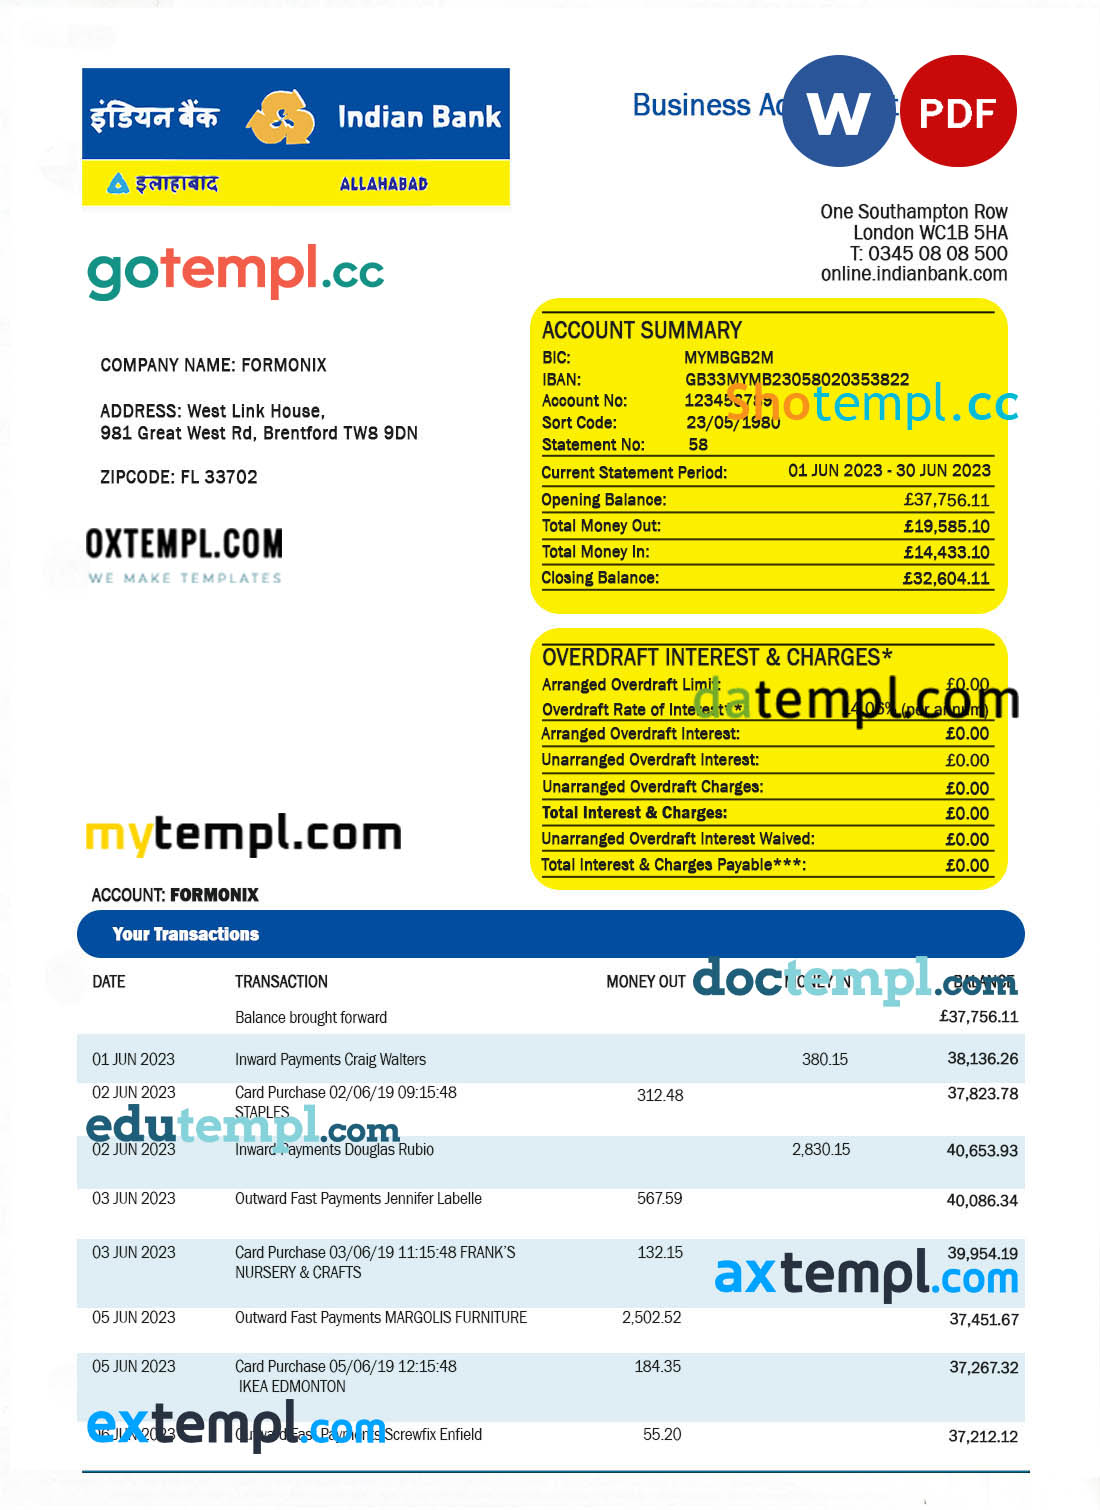 editable template, Indian Bank organization checking account statement Word and PDF template